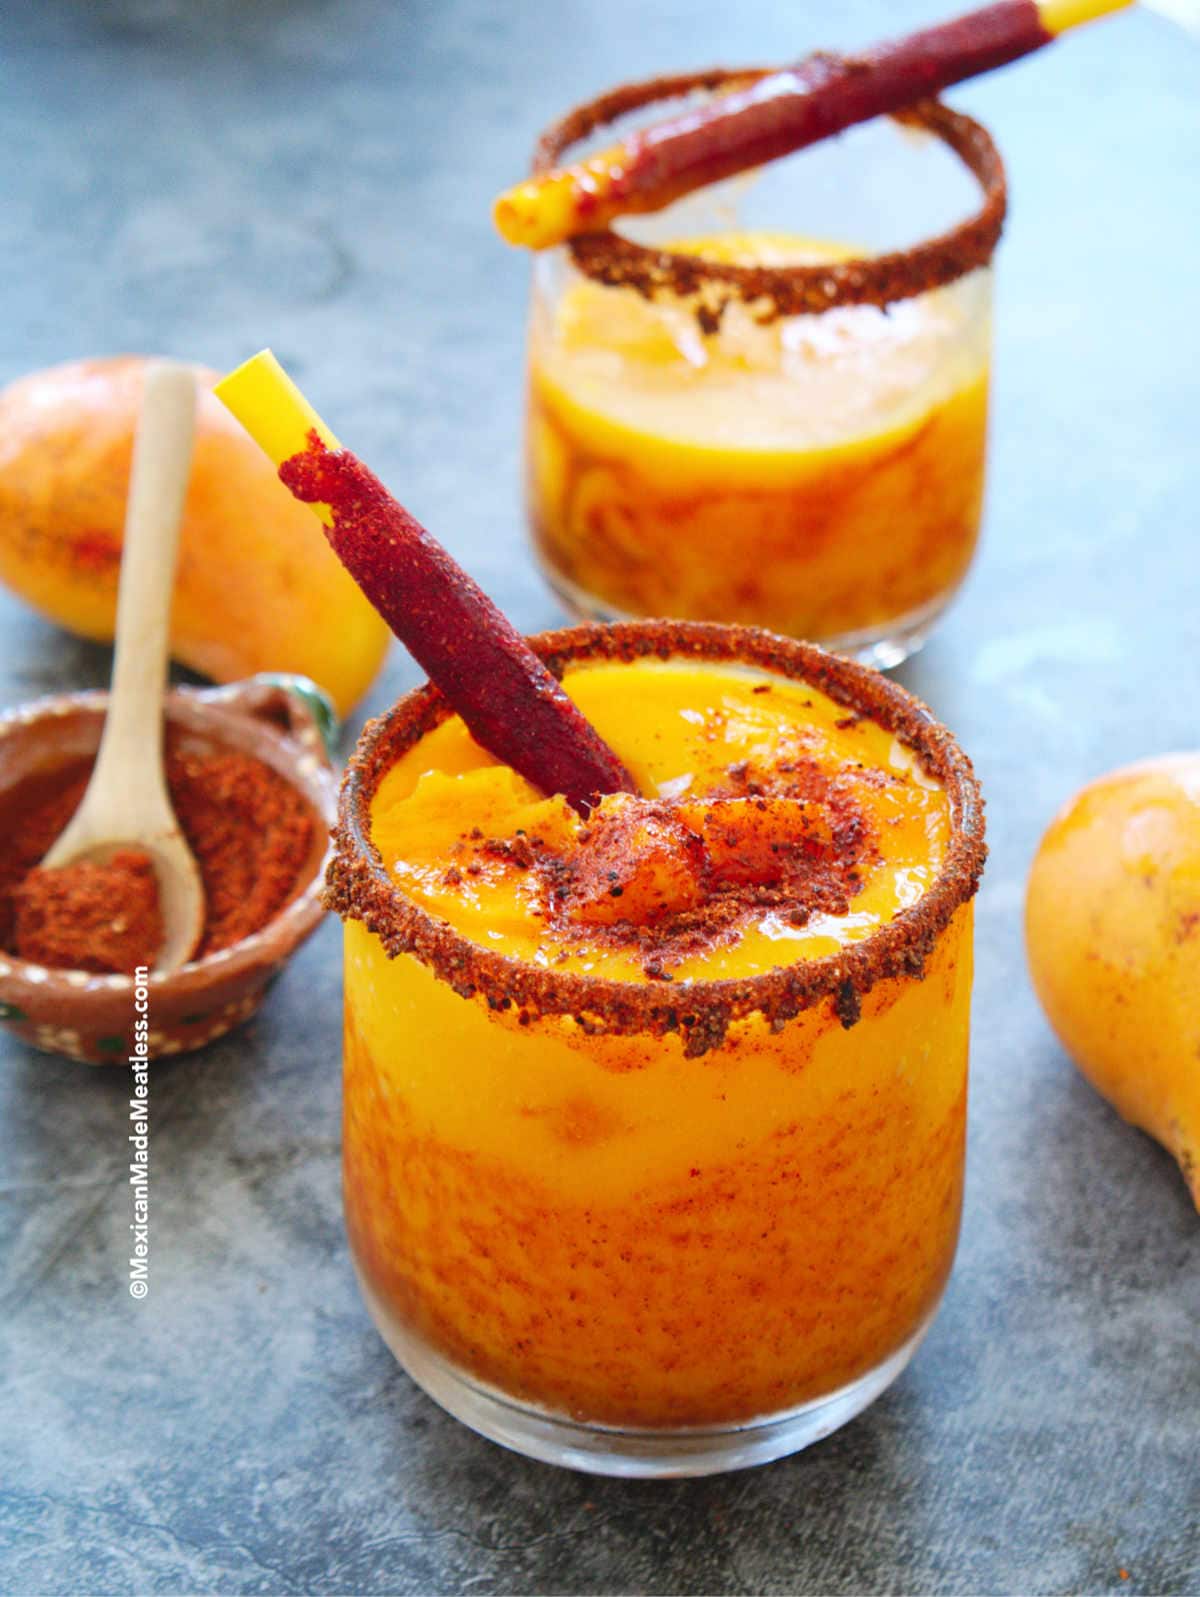 Two glasses full of Mexican frozen mango drinks with chamoy sauce, called mangonadas.